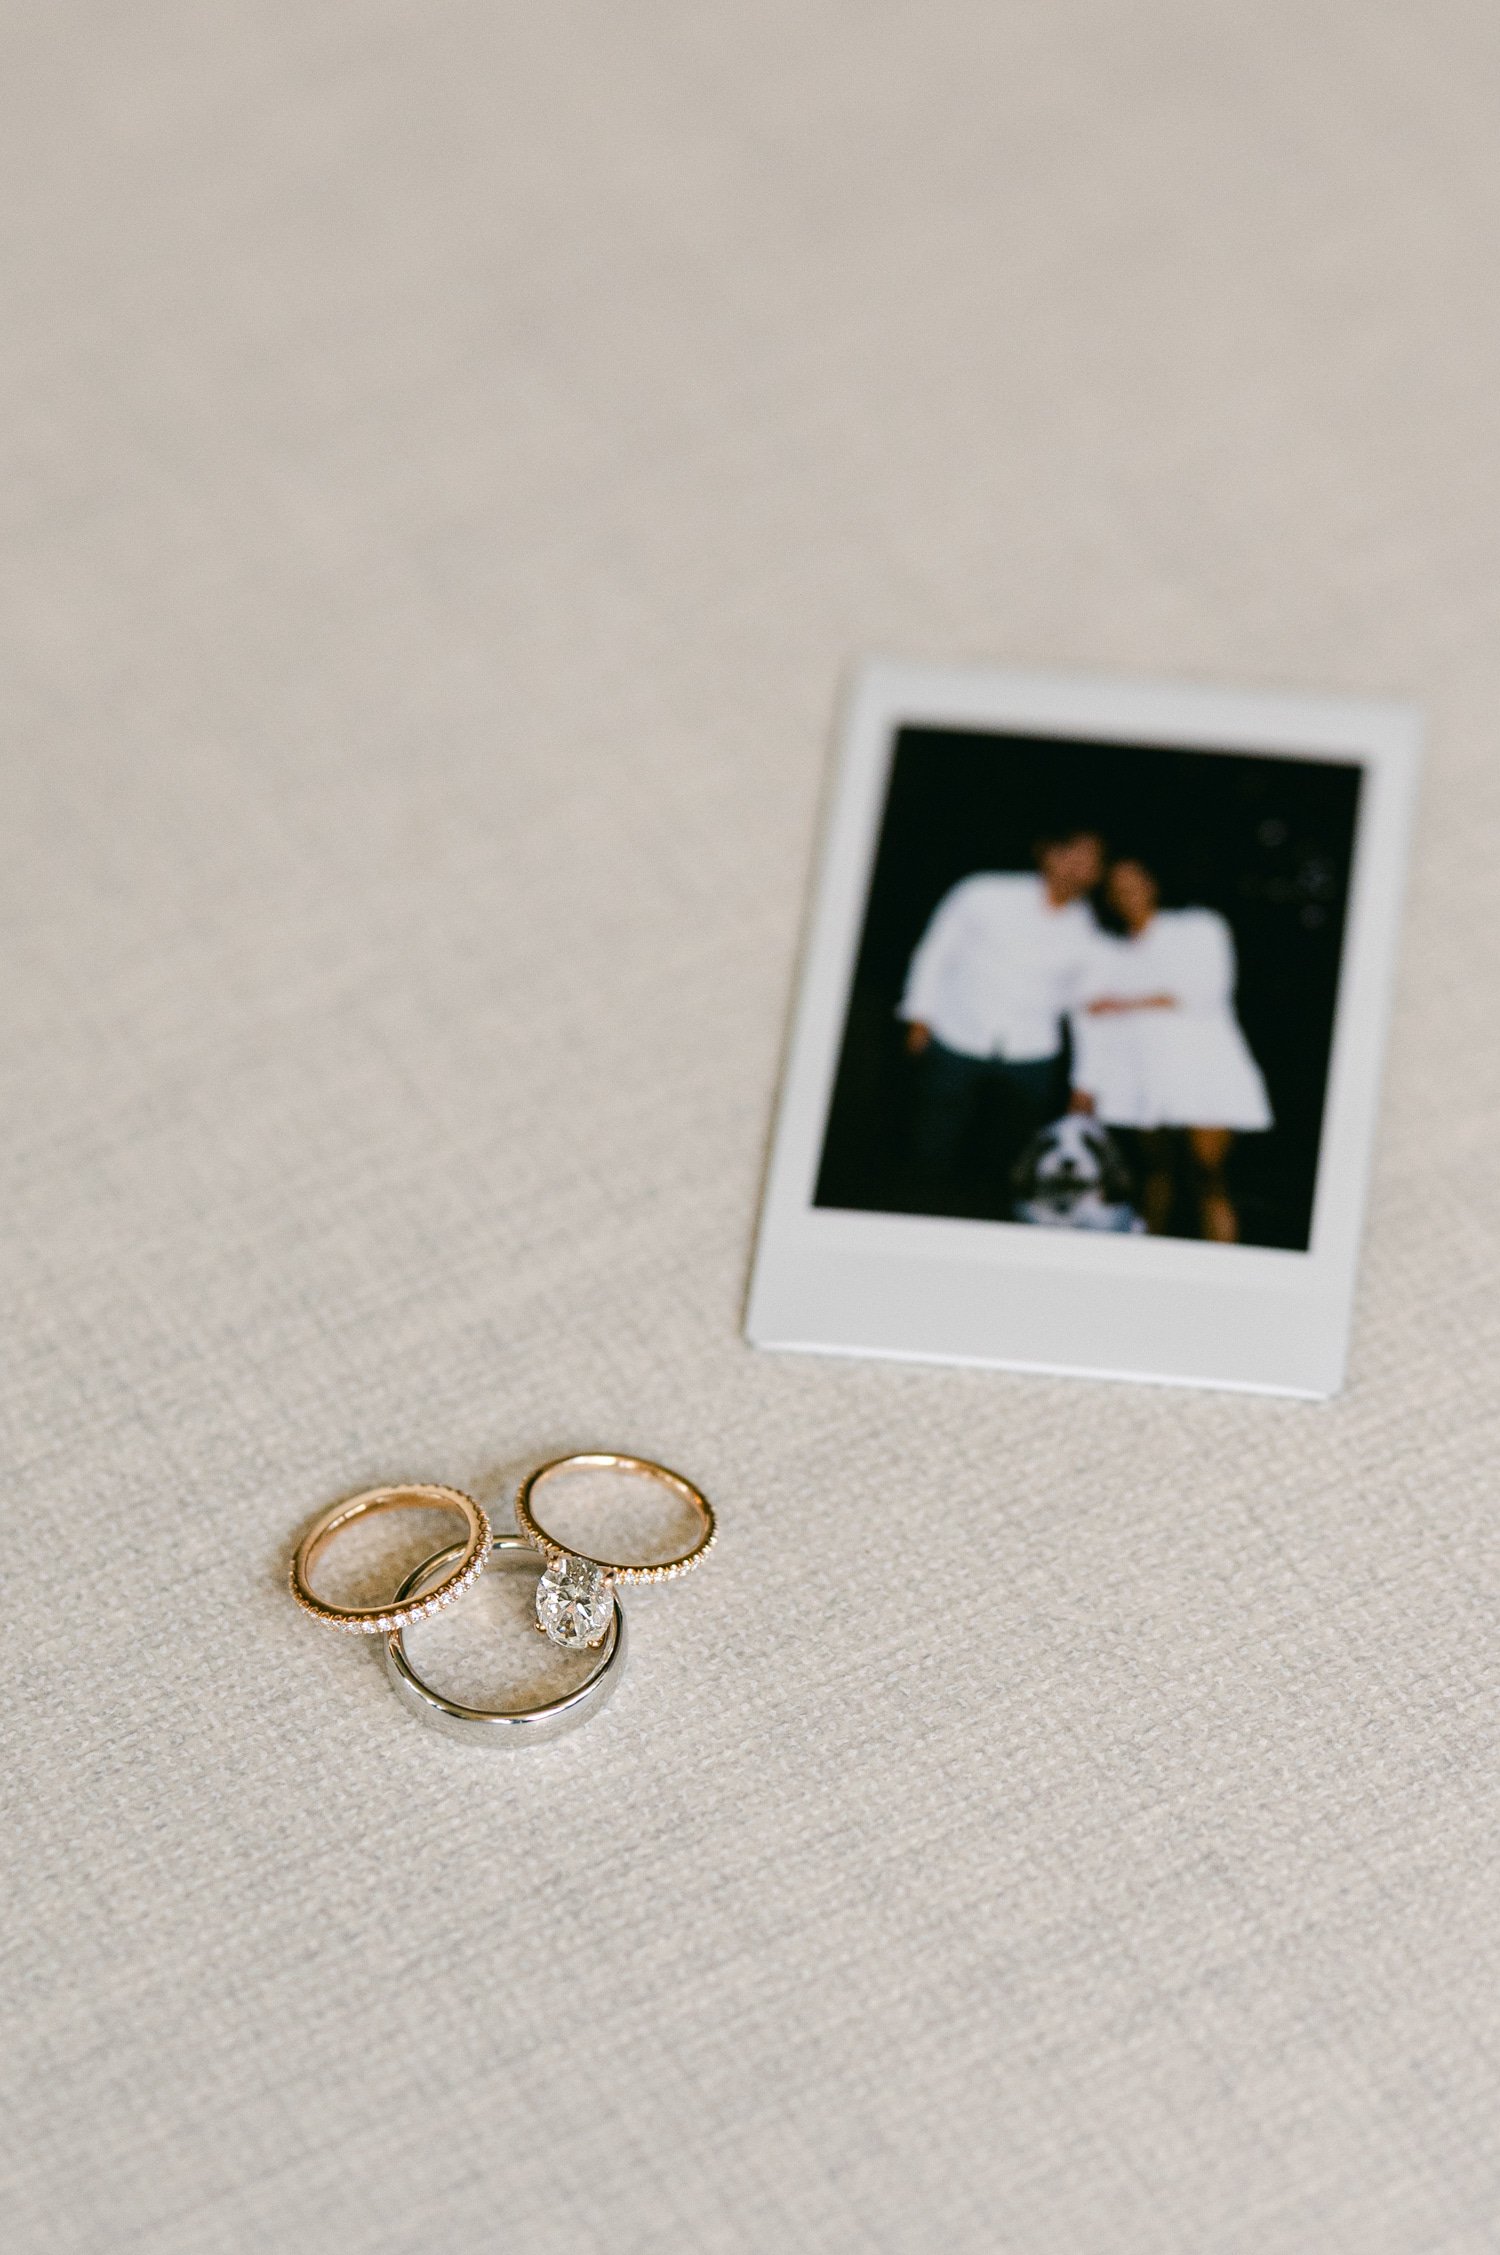 olympic valley stables wedding, photo of wedding rings and a polaroid photo of the couple